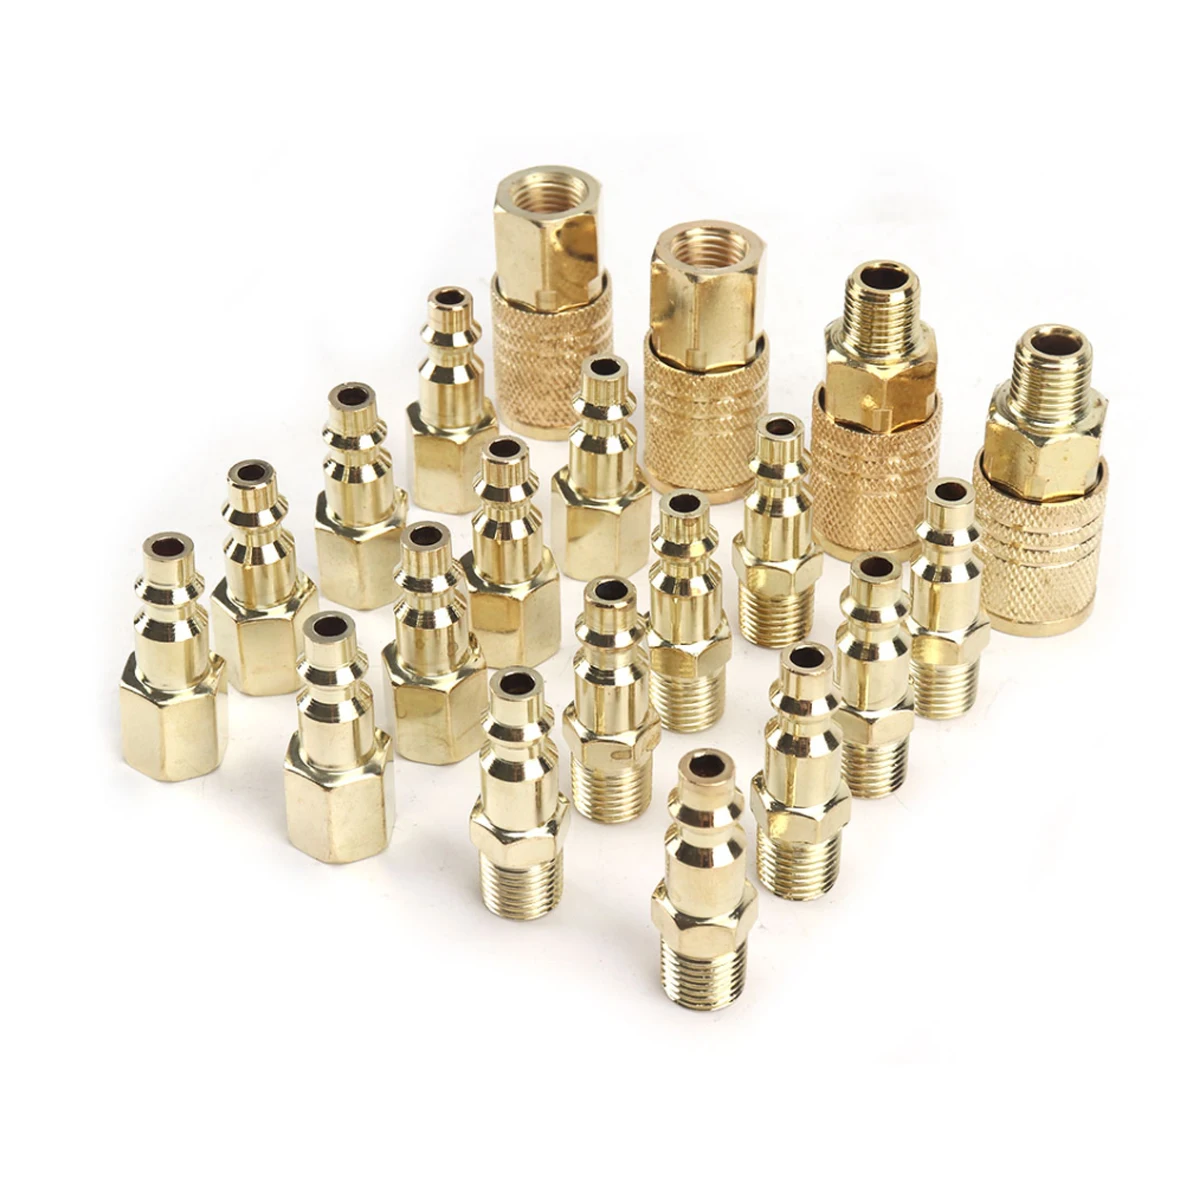 6mm OD 1/4 Inch Plastic Pneumatic Push Connector Set Air Line Quick Fittings 